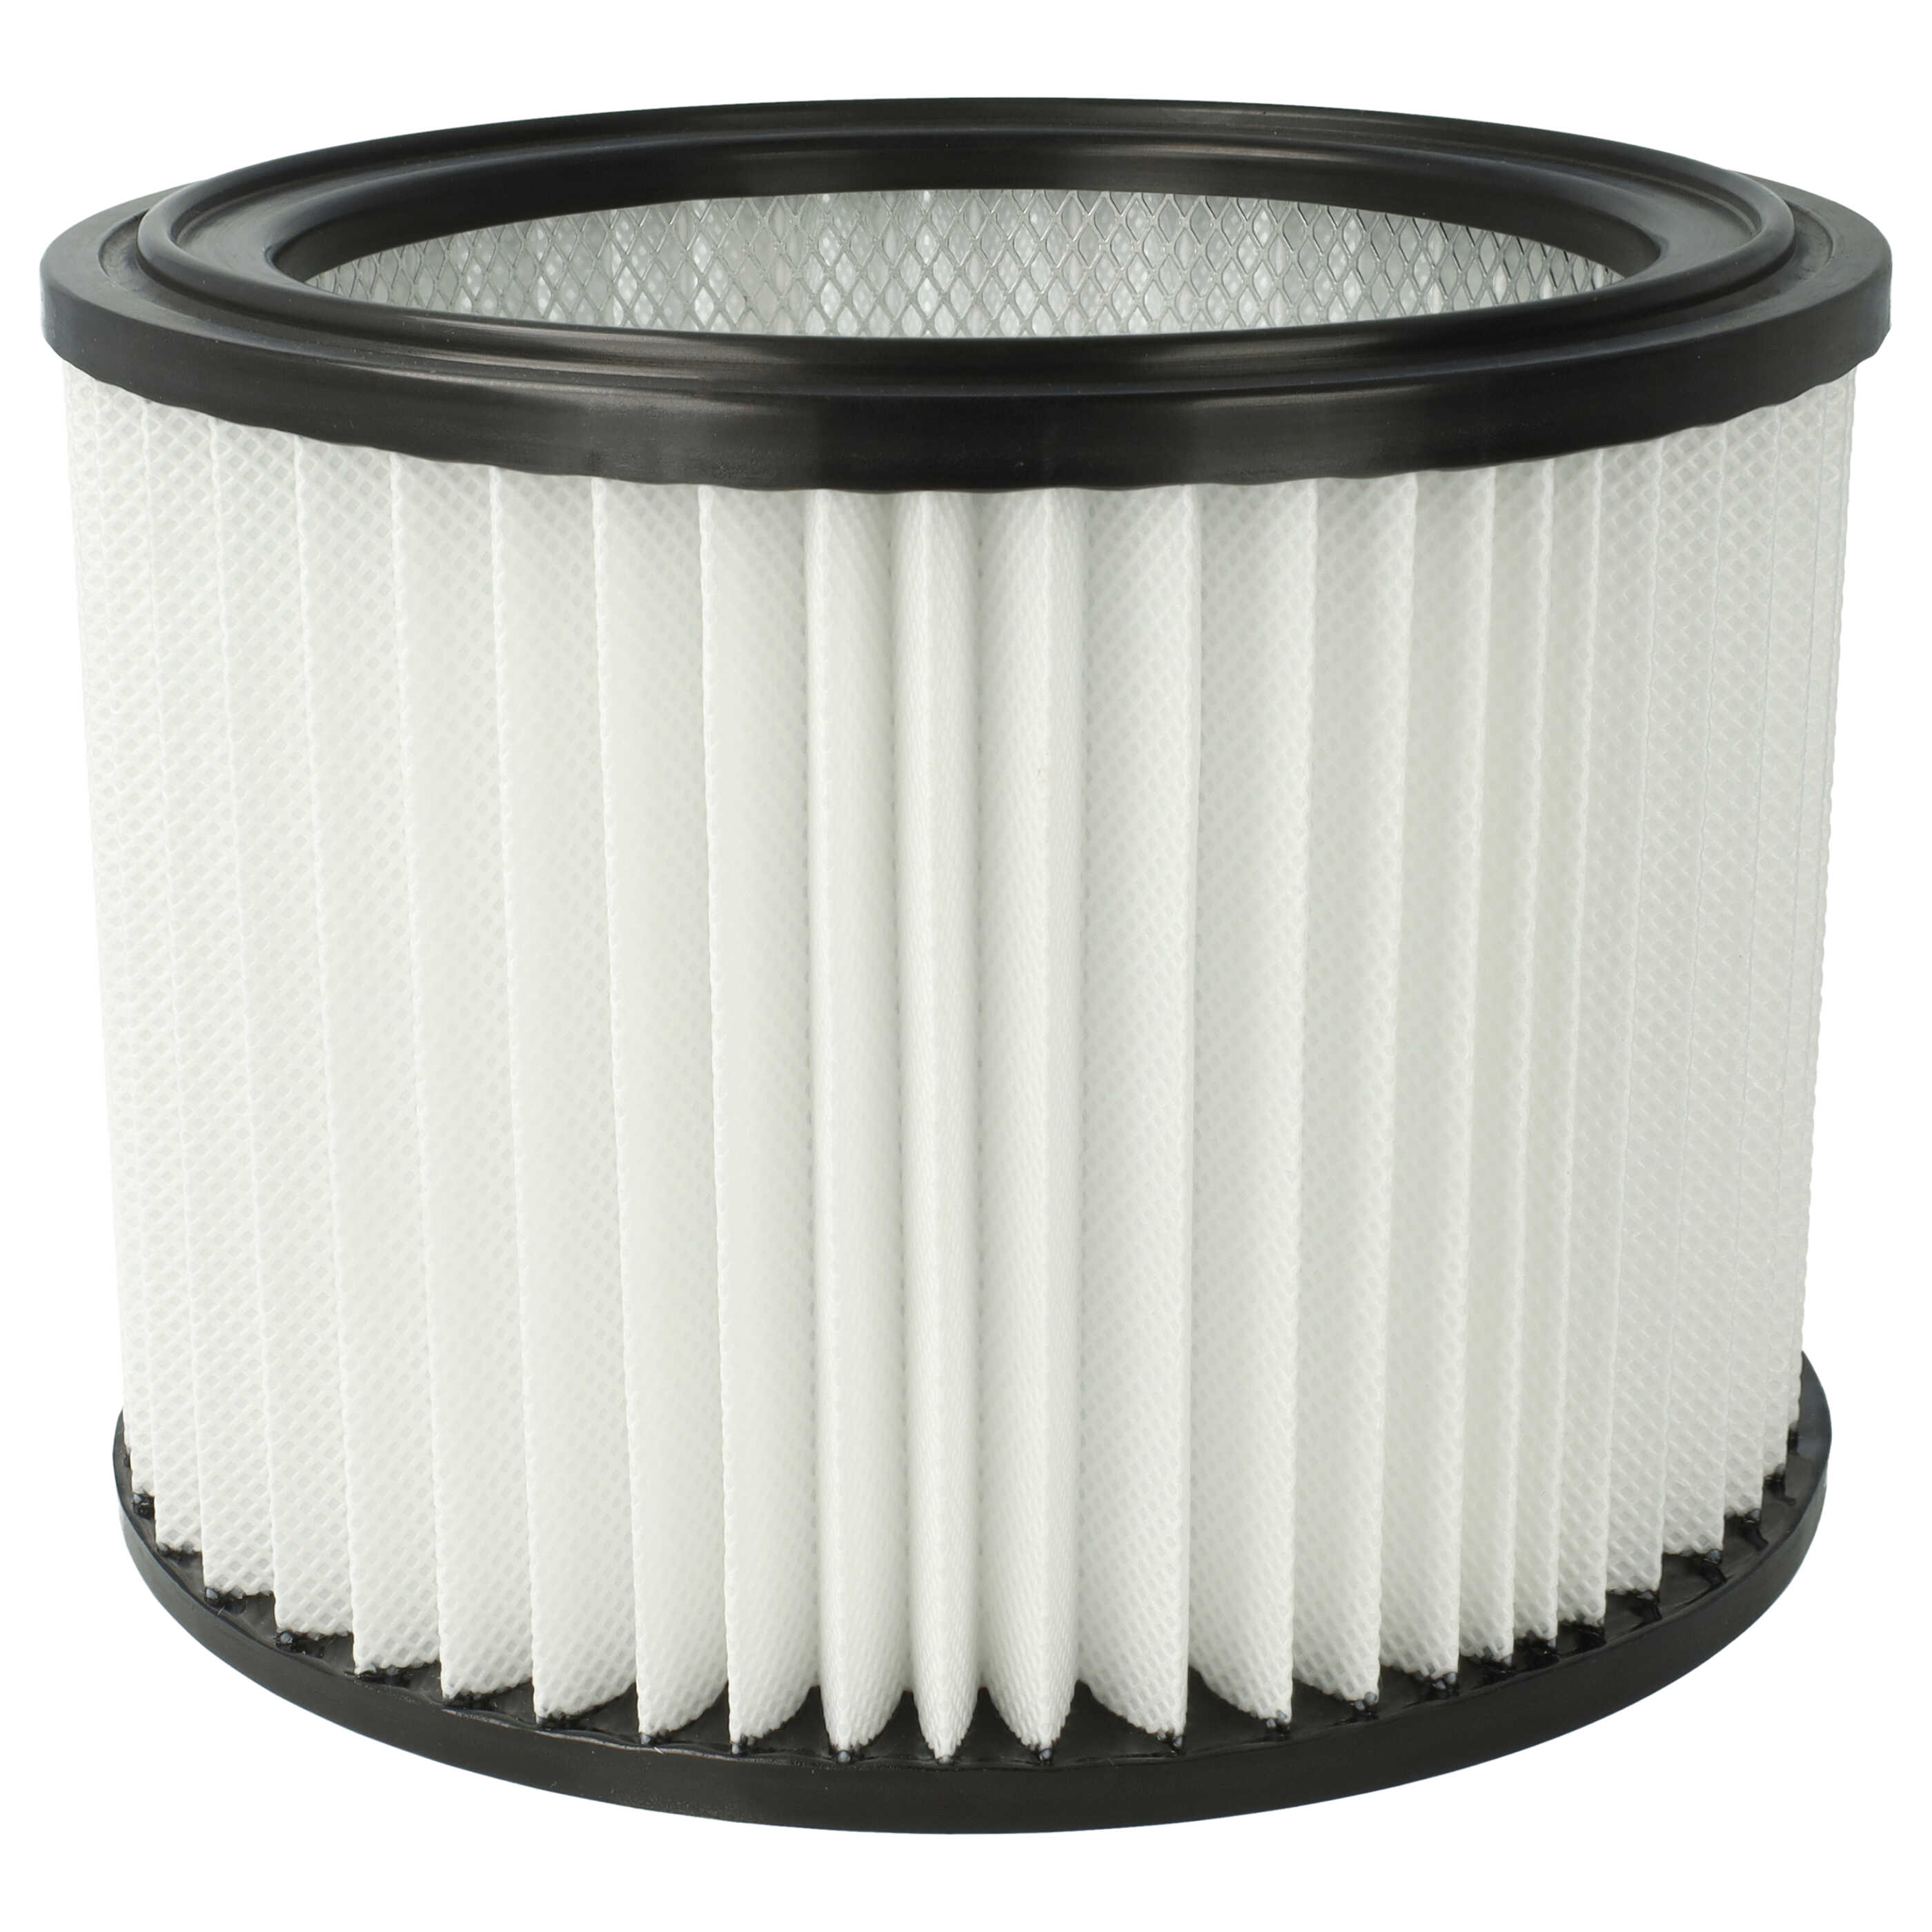 1x filter element replaces Nilfisk 107417194 for NilfiskVacuum Cleaner